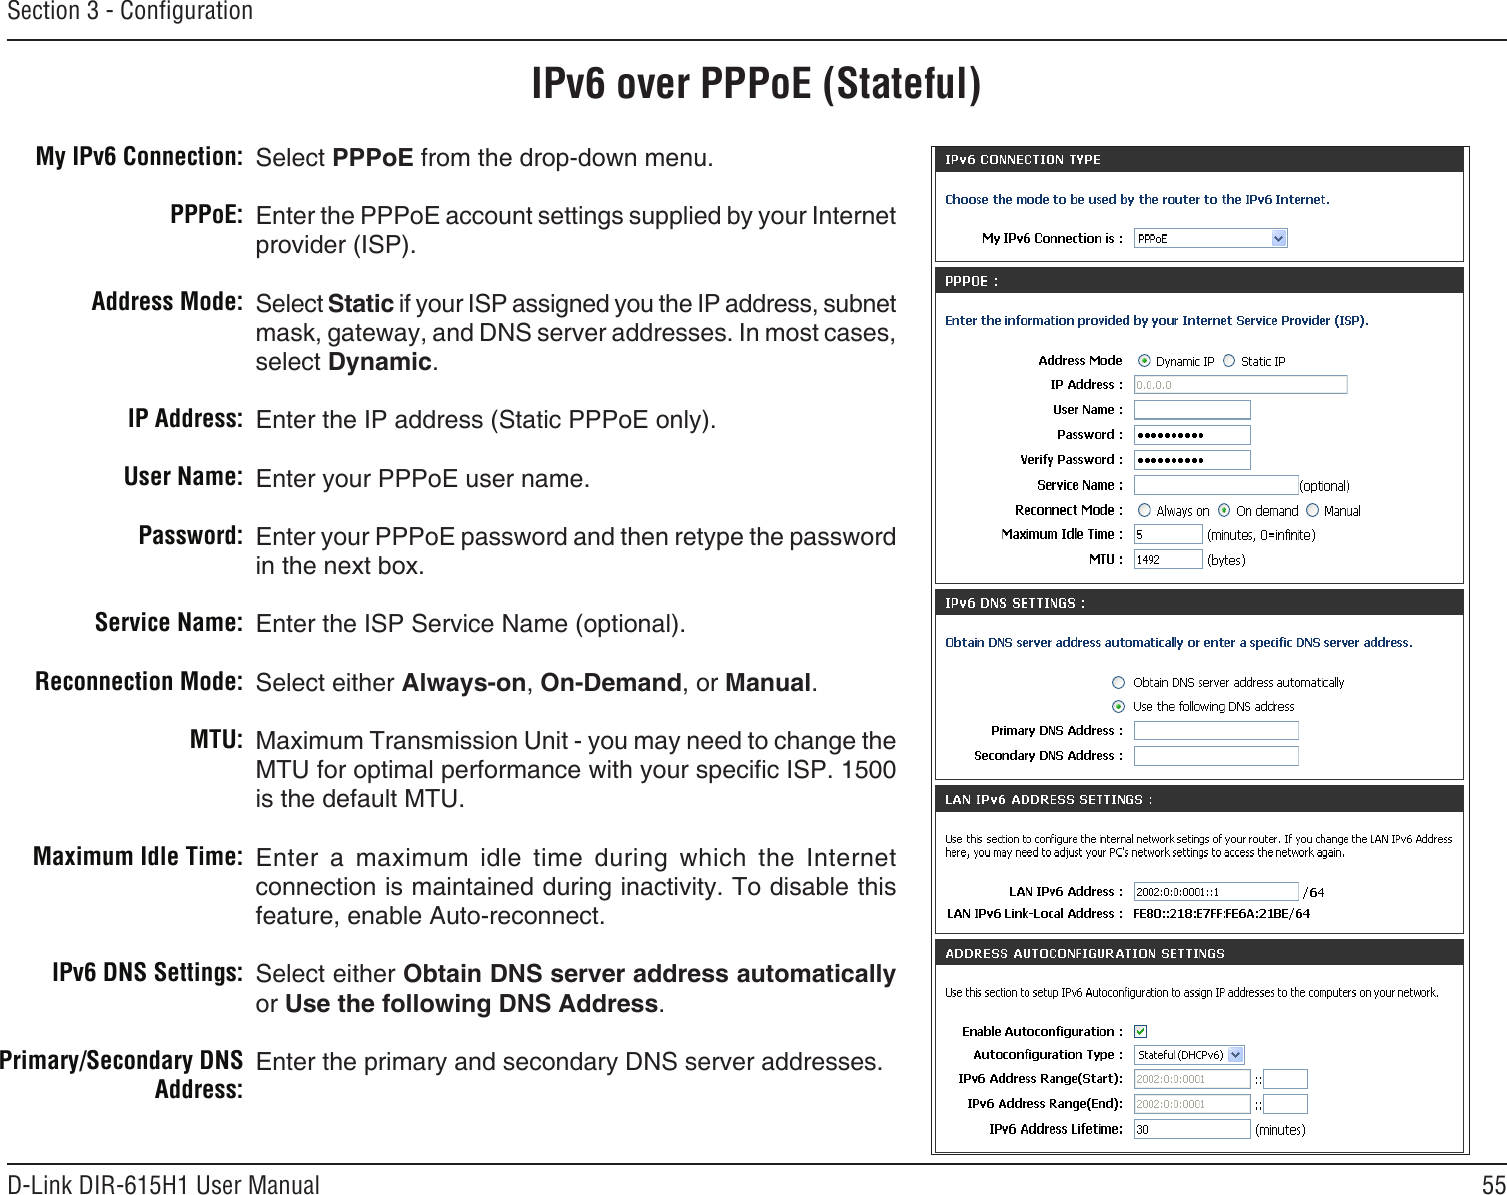 55D-Link DIR-615H1 User ManualSection 3 - CongurationIPv6 over PPPoE (Stateful)Select PPPoE from the drop-down menu.Enter the PPPoE account settings supplied by your Internet provider (ISP). Select Static if your ISP assigned you the IP address, subnet mask, gateway, and DNS server addresses. In most cases, select Dynamic.Enter the IP address (Static PPPoE only).Enter your PPPoE user name.Enter your PPPoE password and then retype the password in the next box.Enter the ISP Service Name (optional).Select either Always-on, On-Demand, or Manual.Maximum Transmission Unit - you may need to change the MTU for optimal performance with your specic ISP. 1500 is the default MTU.Enter  a  maximum  idle  time  during  which  the  Internet connection is maintained during inactivity. To disable this feature, enable Auto-reconnect.Select either Obtain DNS server address automatically or Use the following DNS Address.Enter the primary and secondary DNS server addresses. My IPv6 Connection:PPPoE:Address Mode:IP Address:User Name:Password:Service Name:Reconnection Mode:MTU:Maximum Idle Time:IPv6 DNS Settings:Primary/Secondary DNS Address: